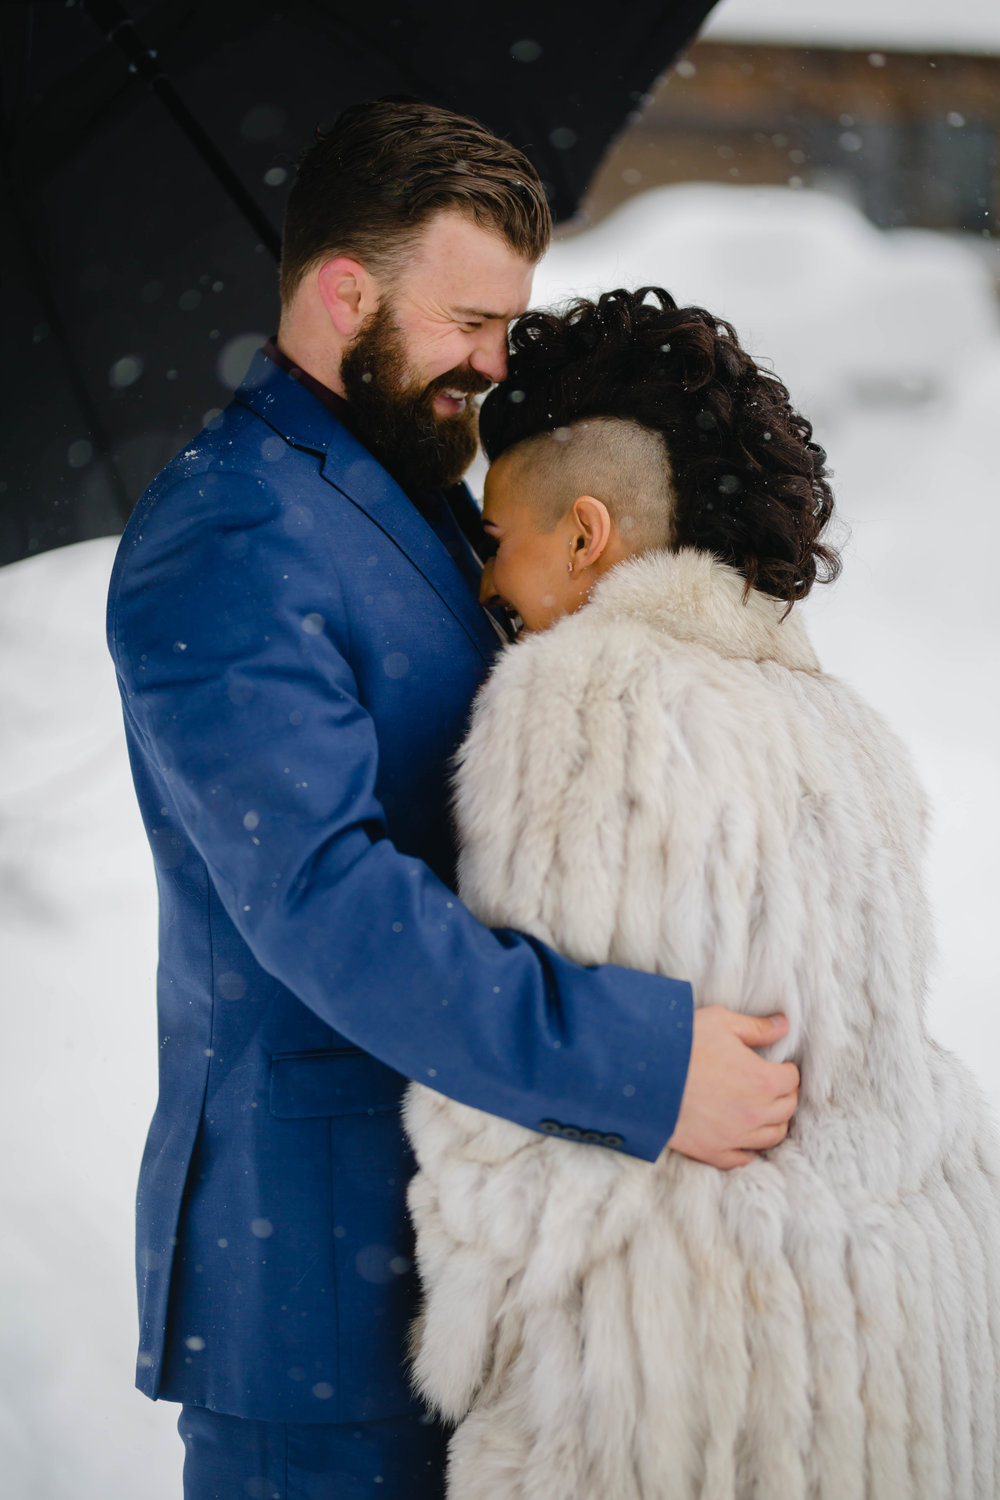 candid photo of the bride and groom on a snowy wedding day